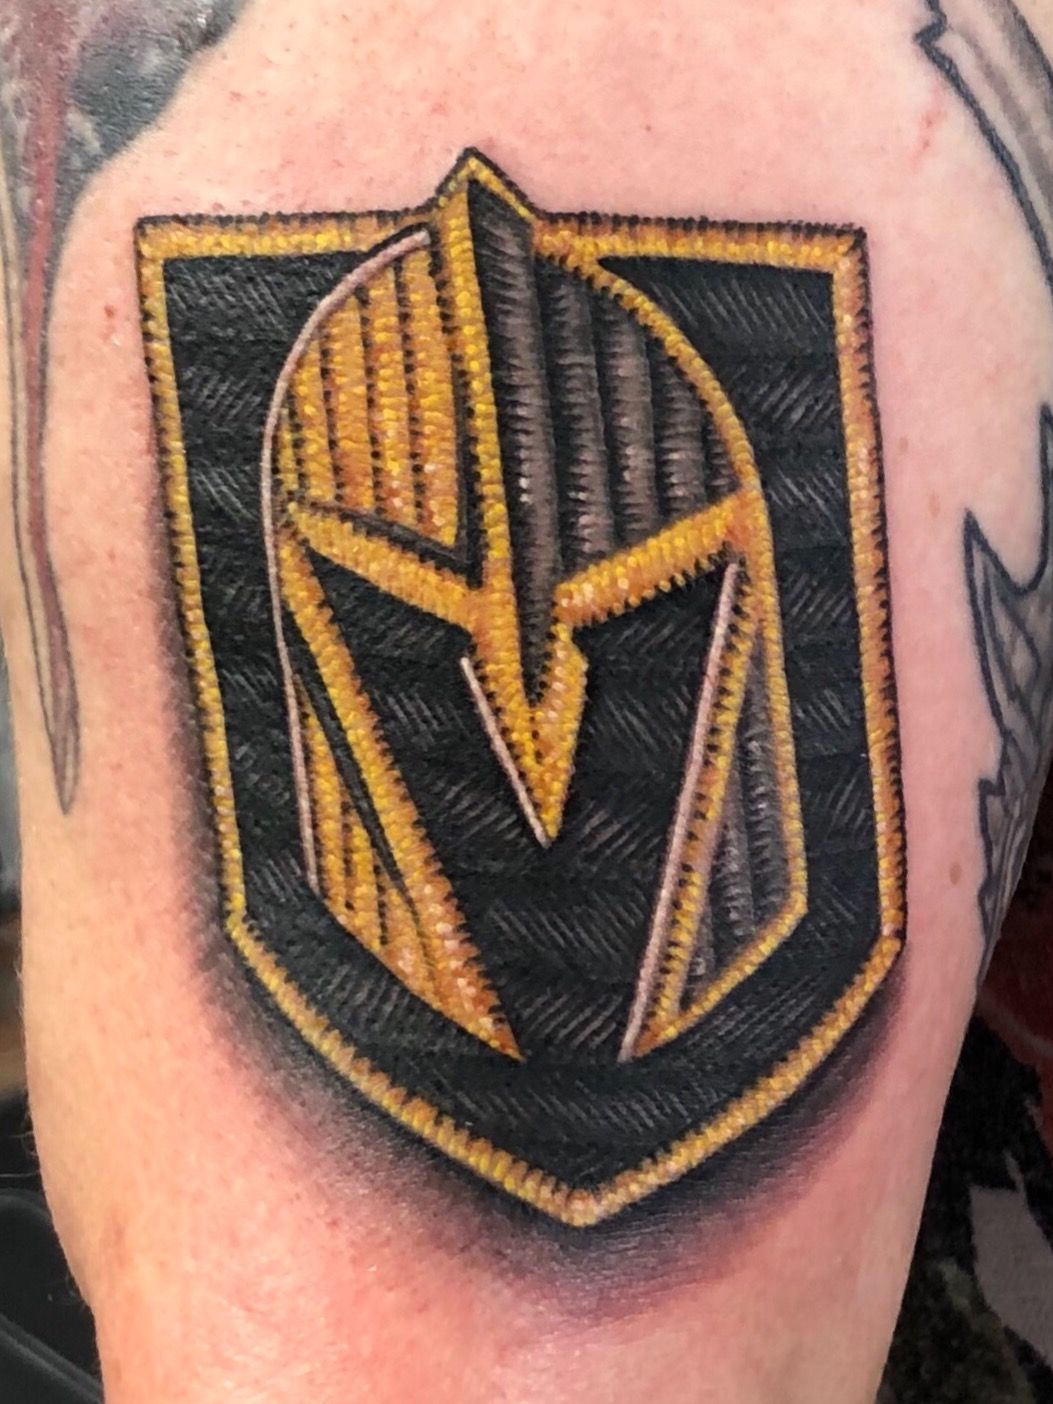 Tattoo You: Golden Knights Fans seal their connection to the team